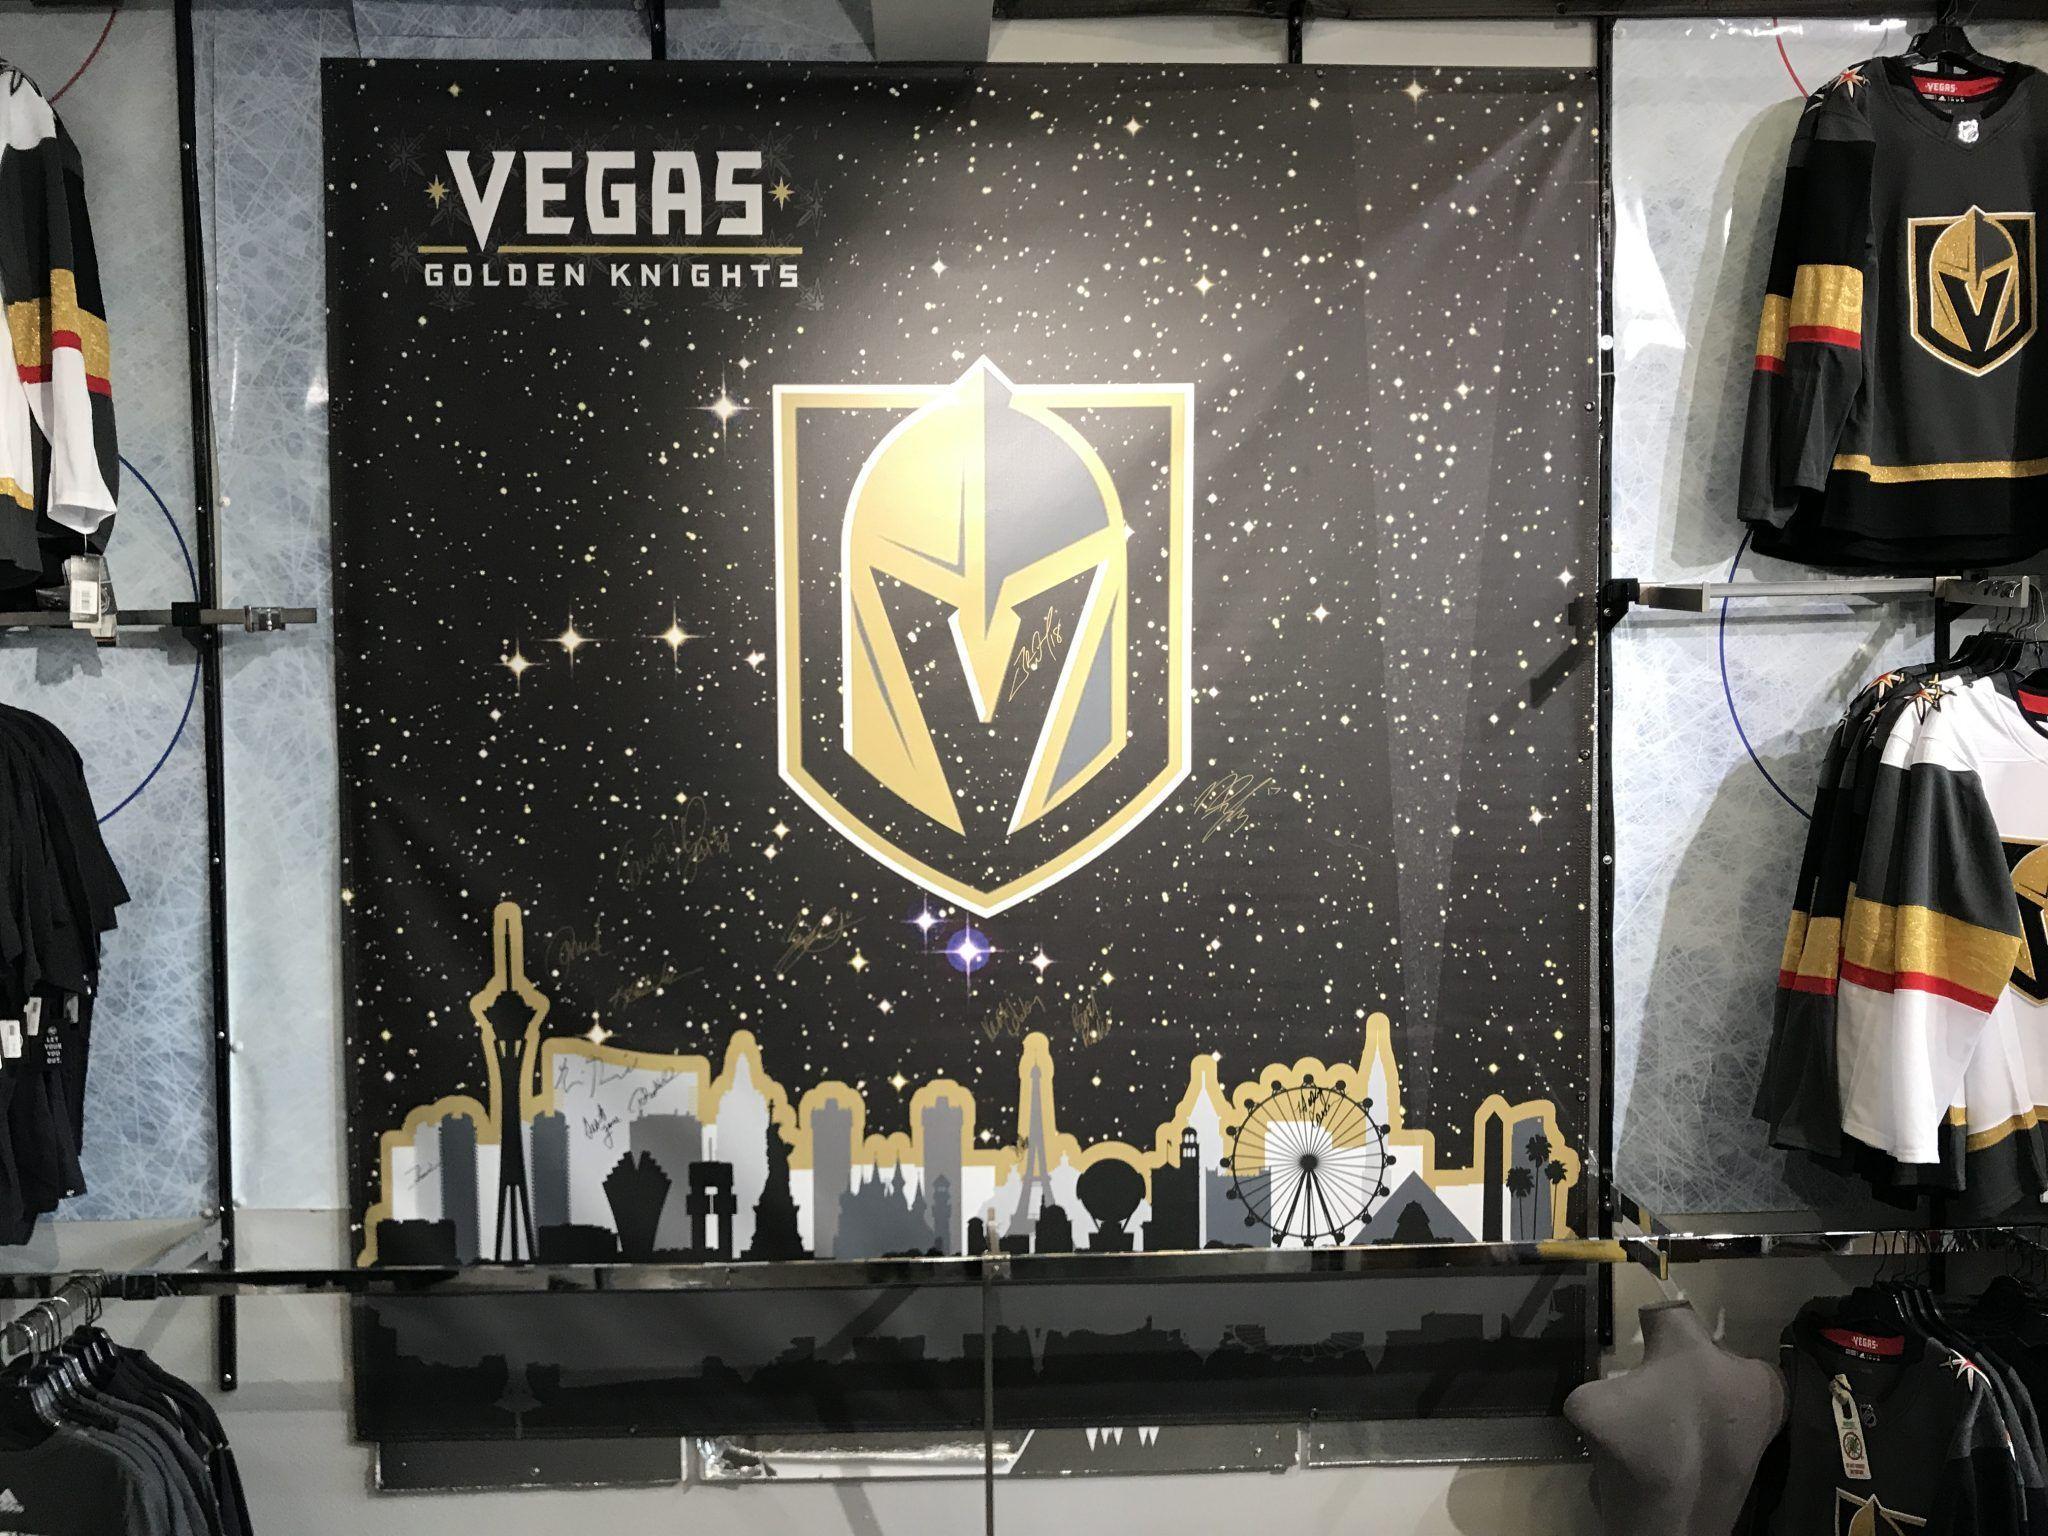 Bid On Signed Vegas Golden Knights Banner For Charity